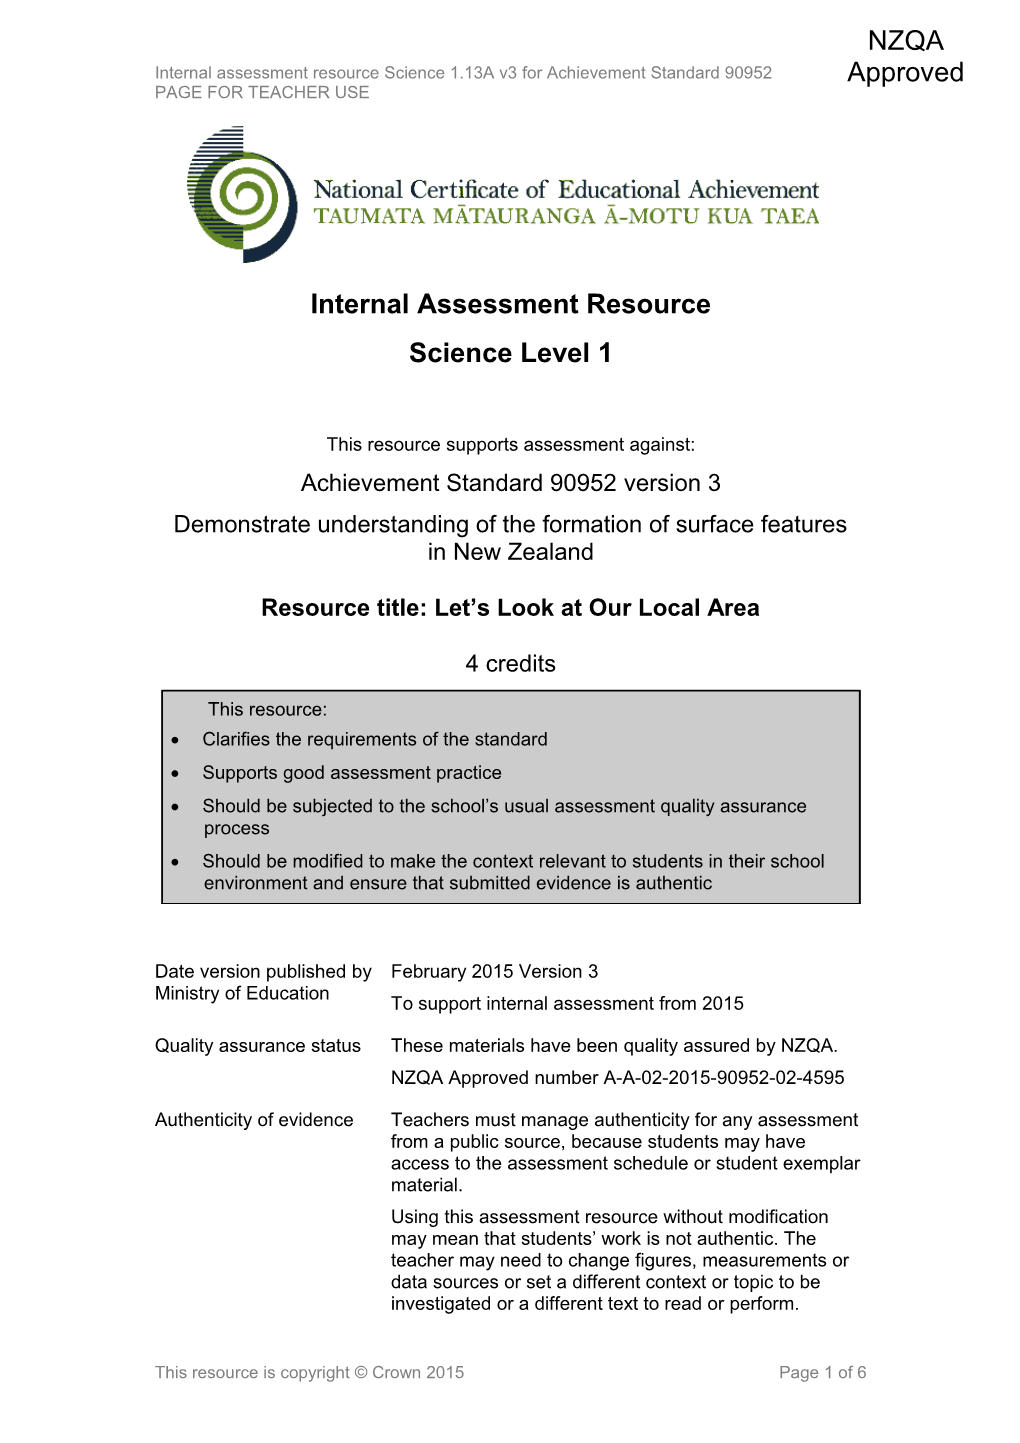 Level 1 Science Internal Assessment Resource s1